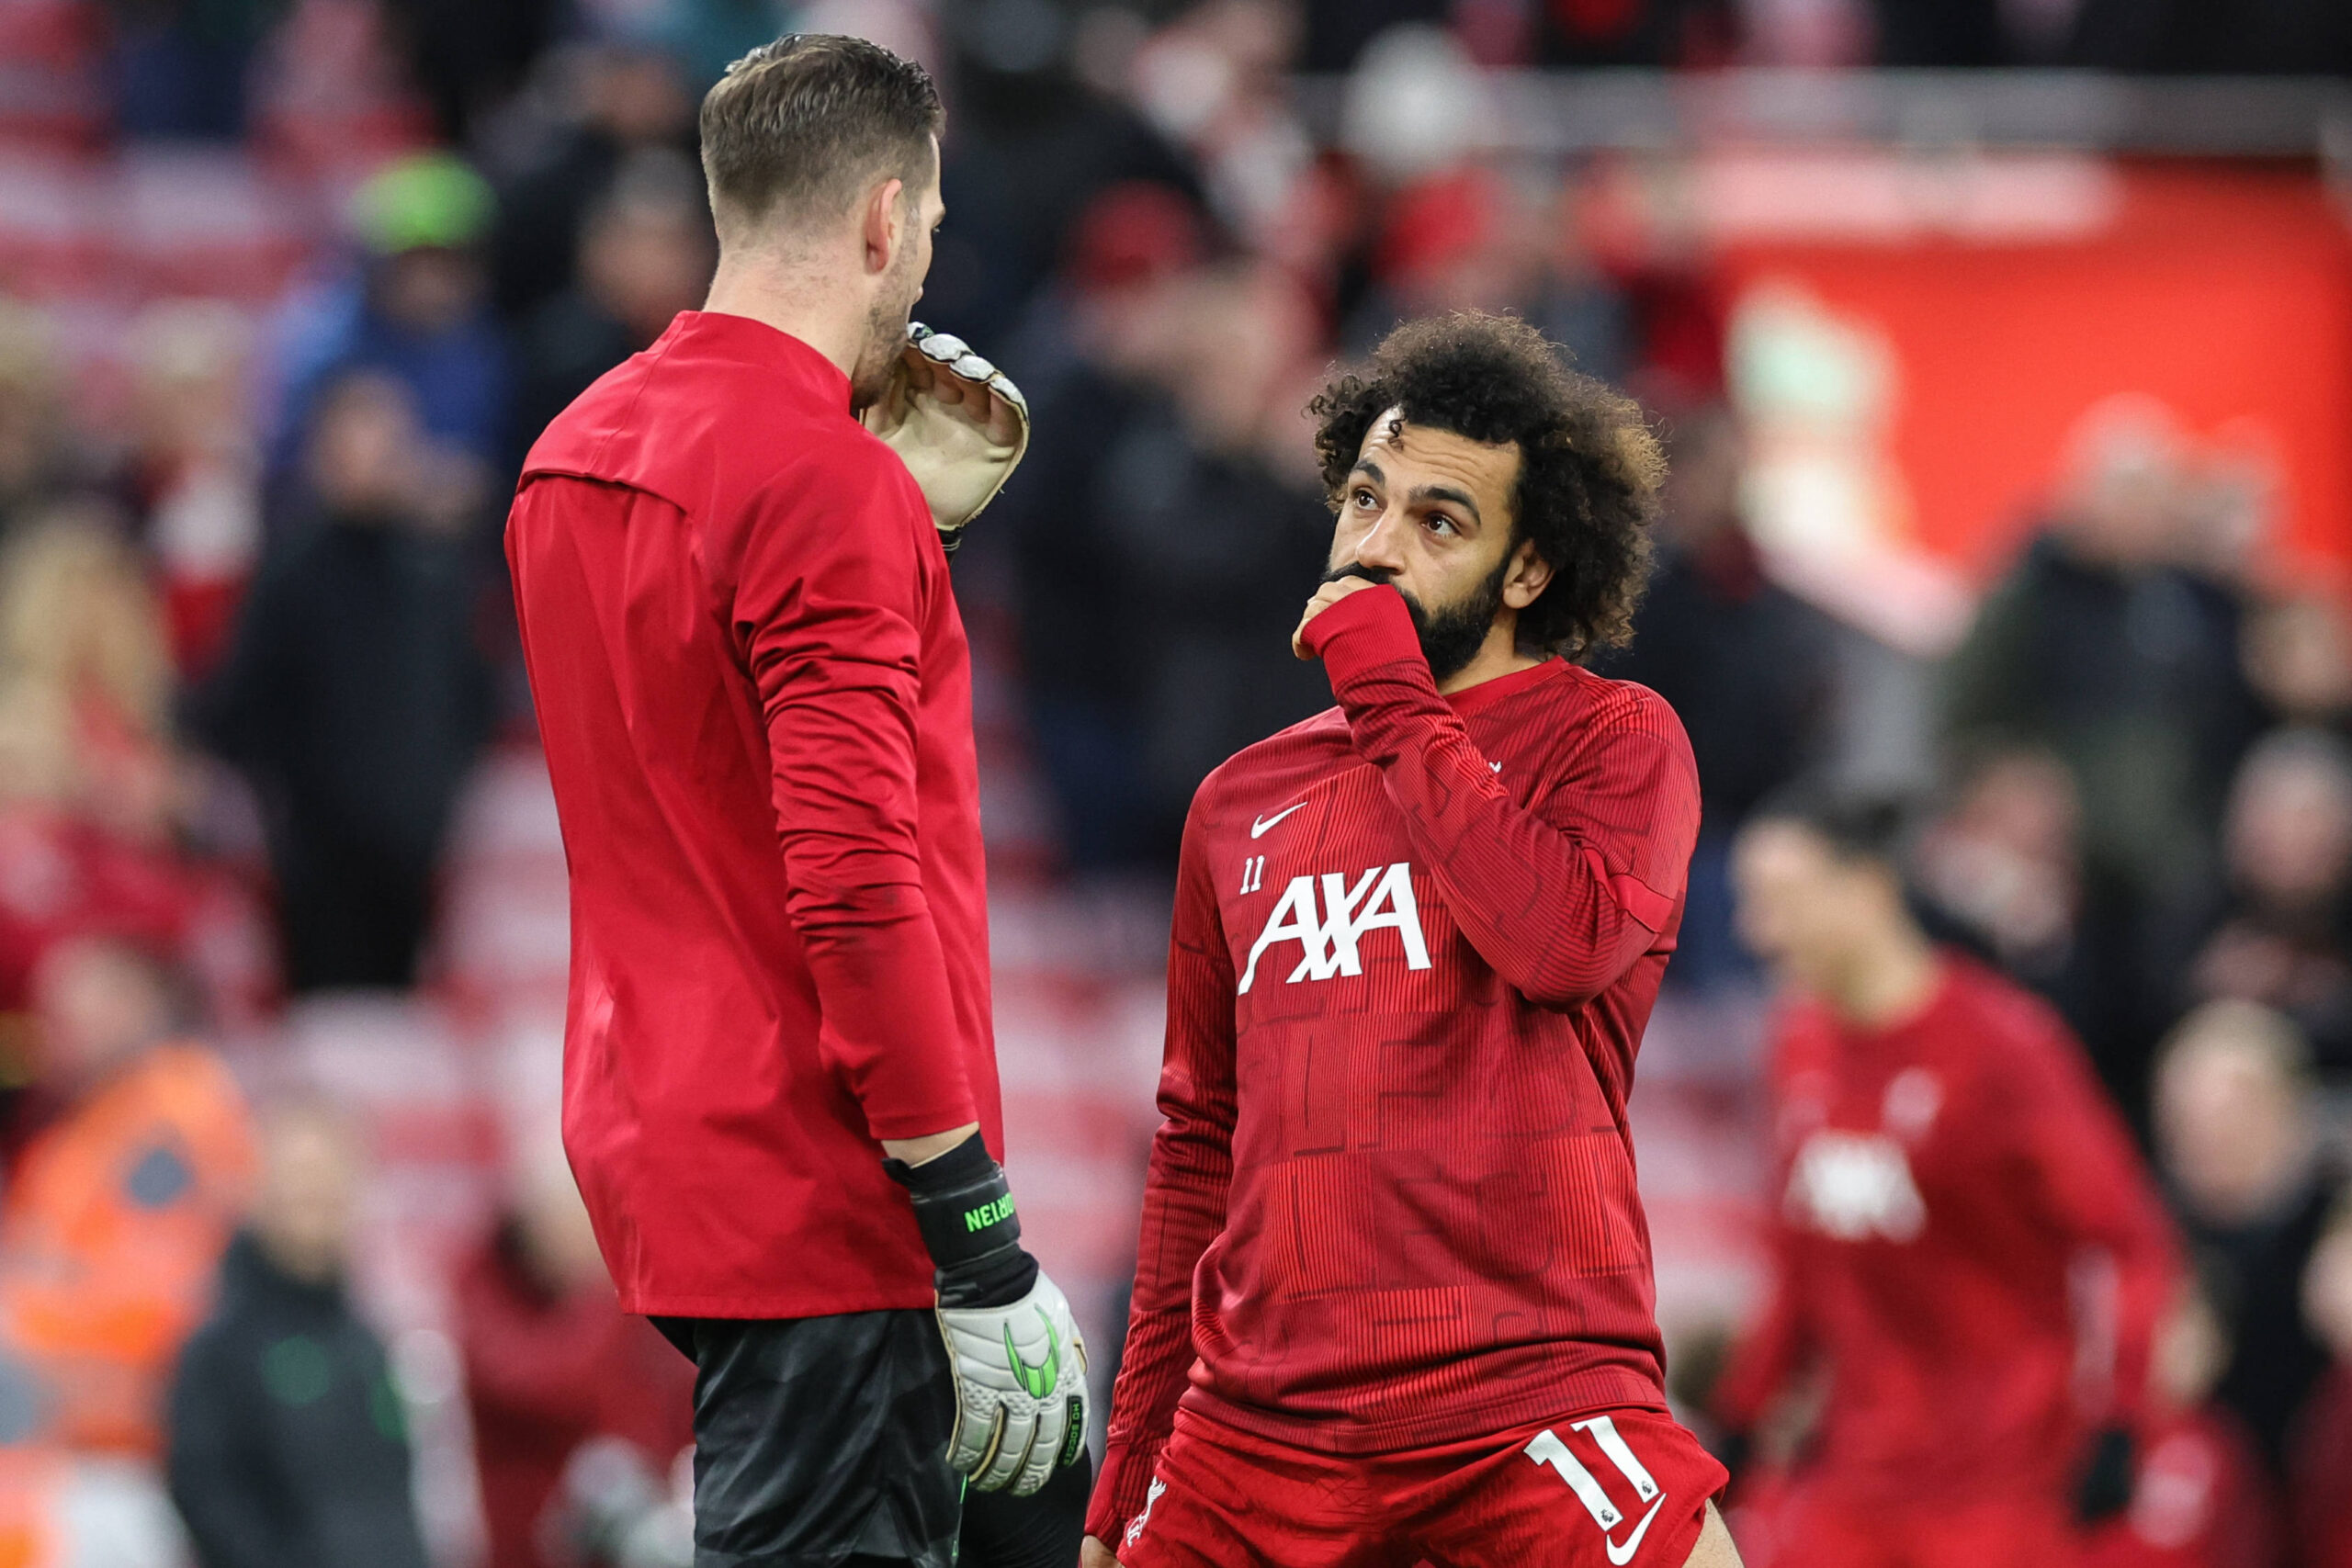 Adrian and Mo Salah speaking during pre-match warmup